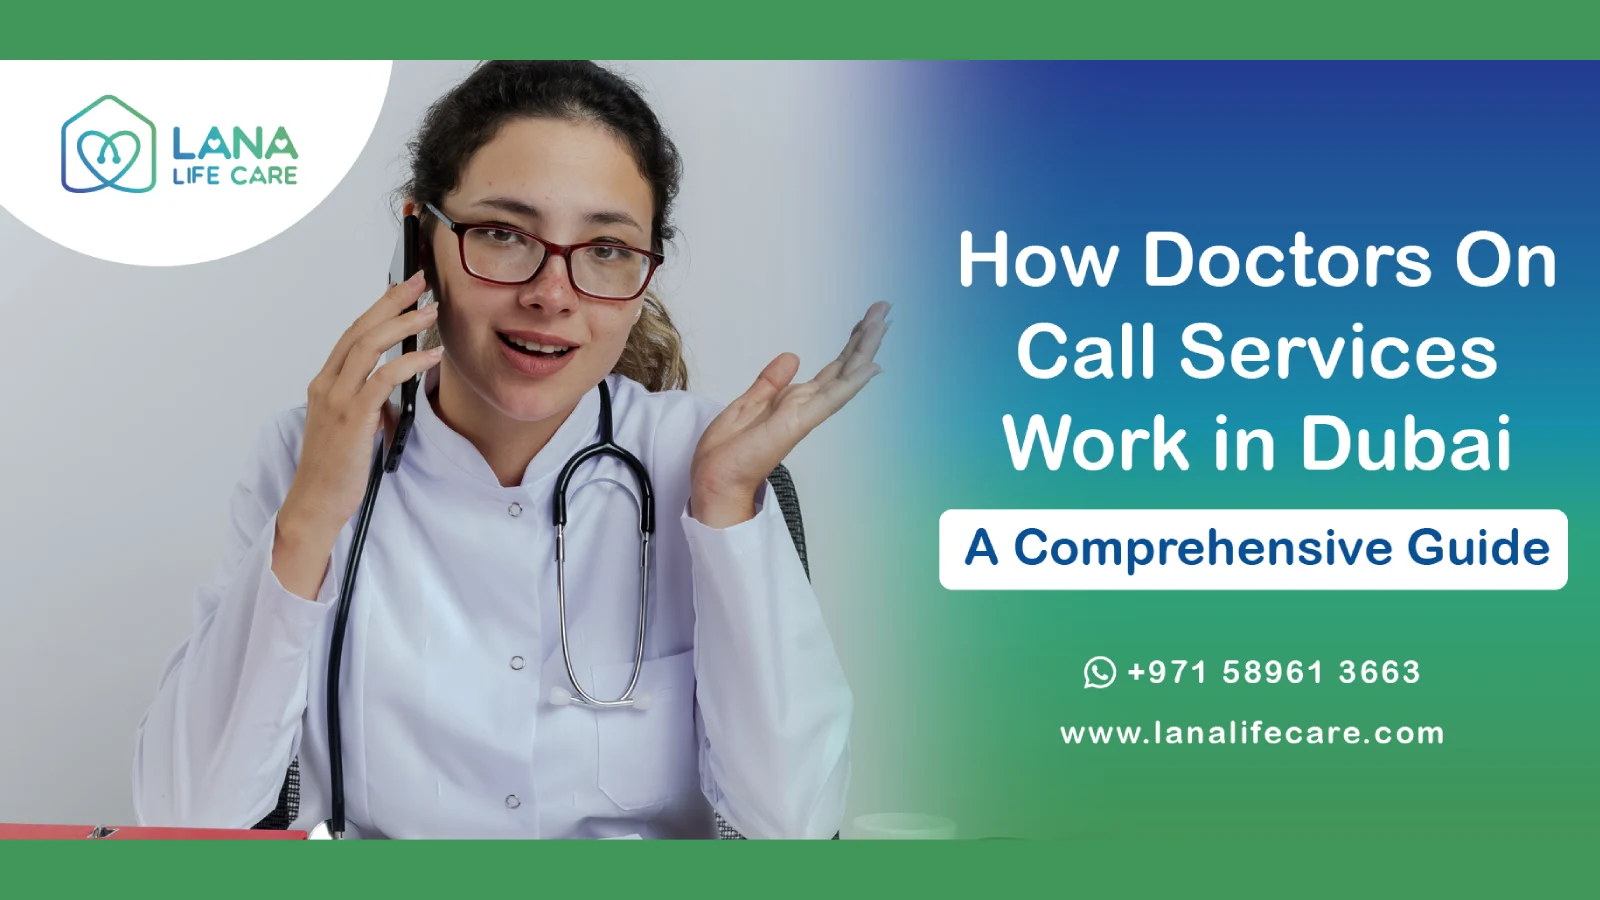 Doctors On Call Services in Dubai